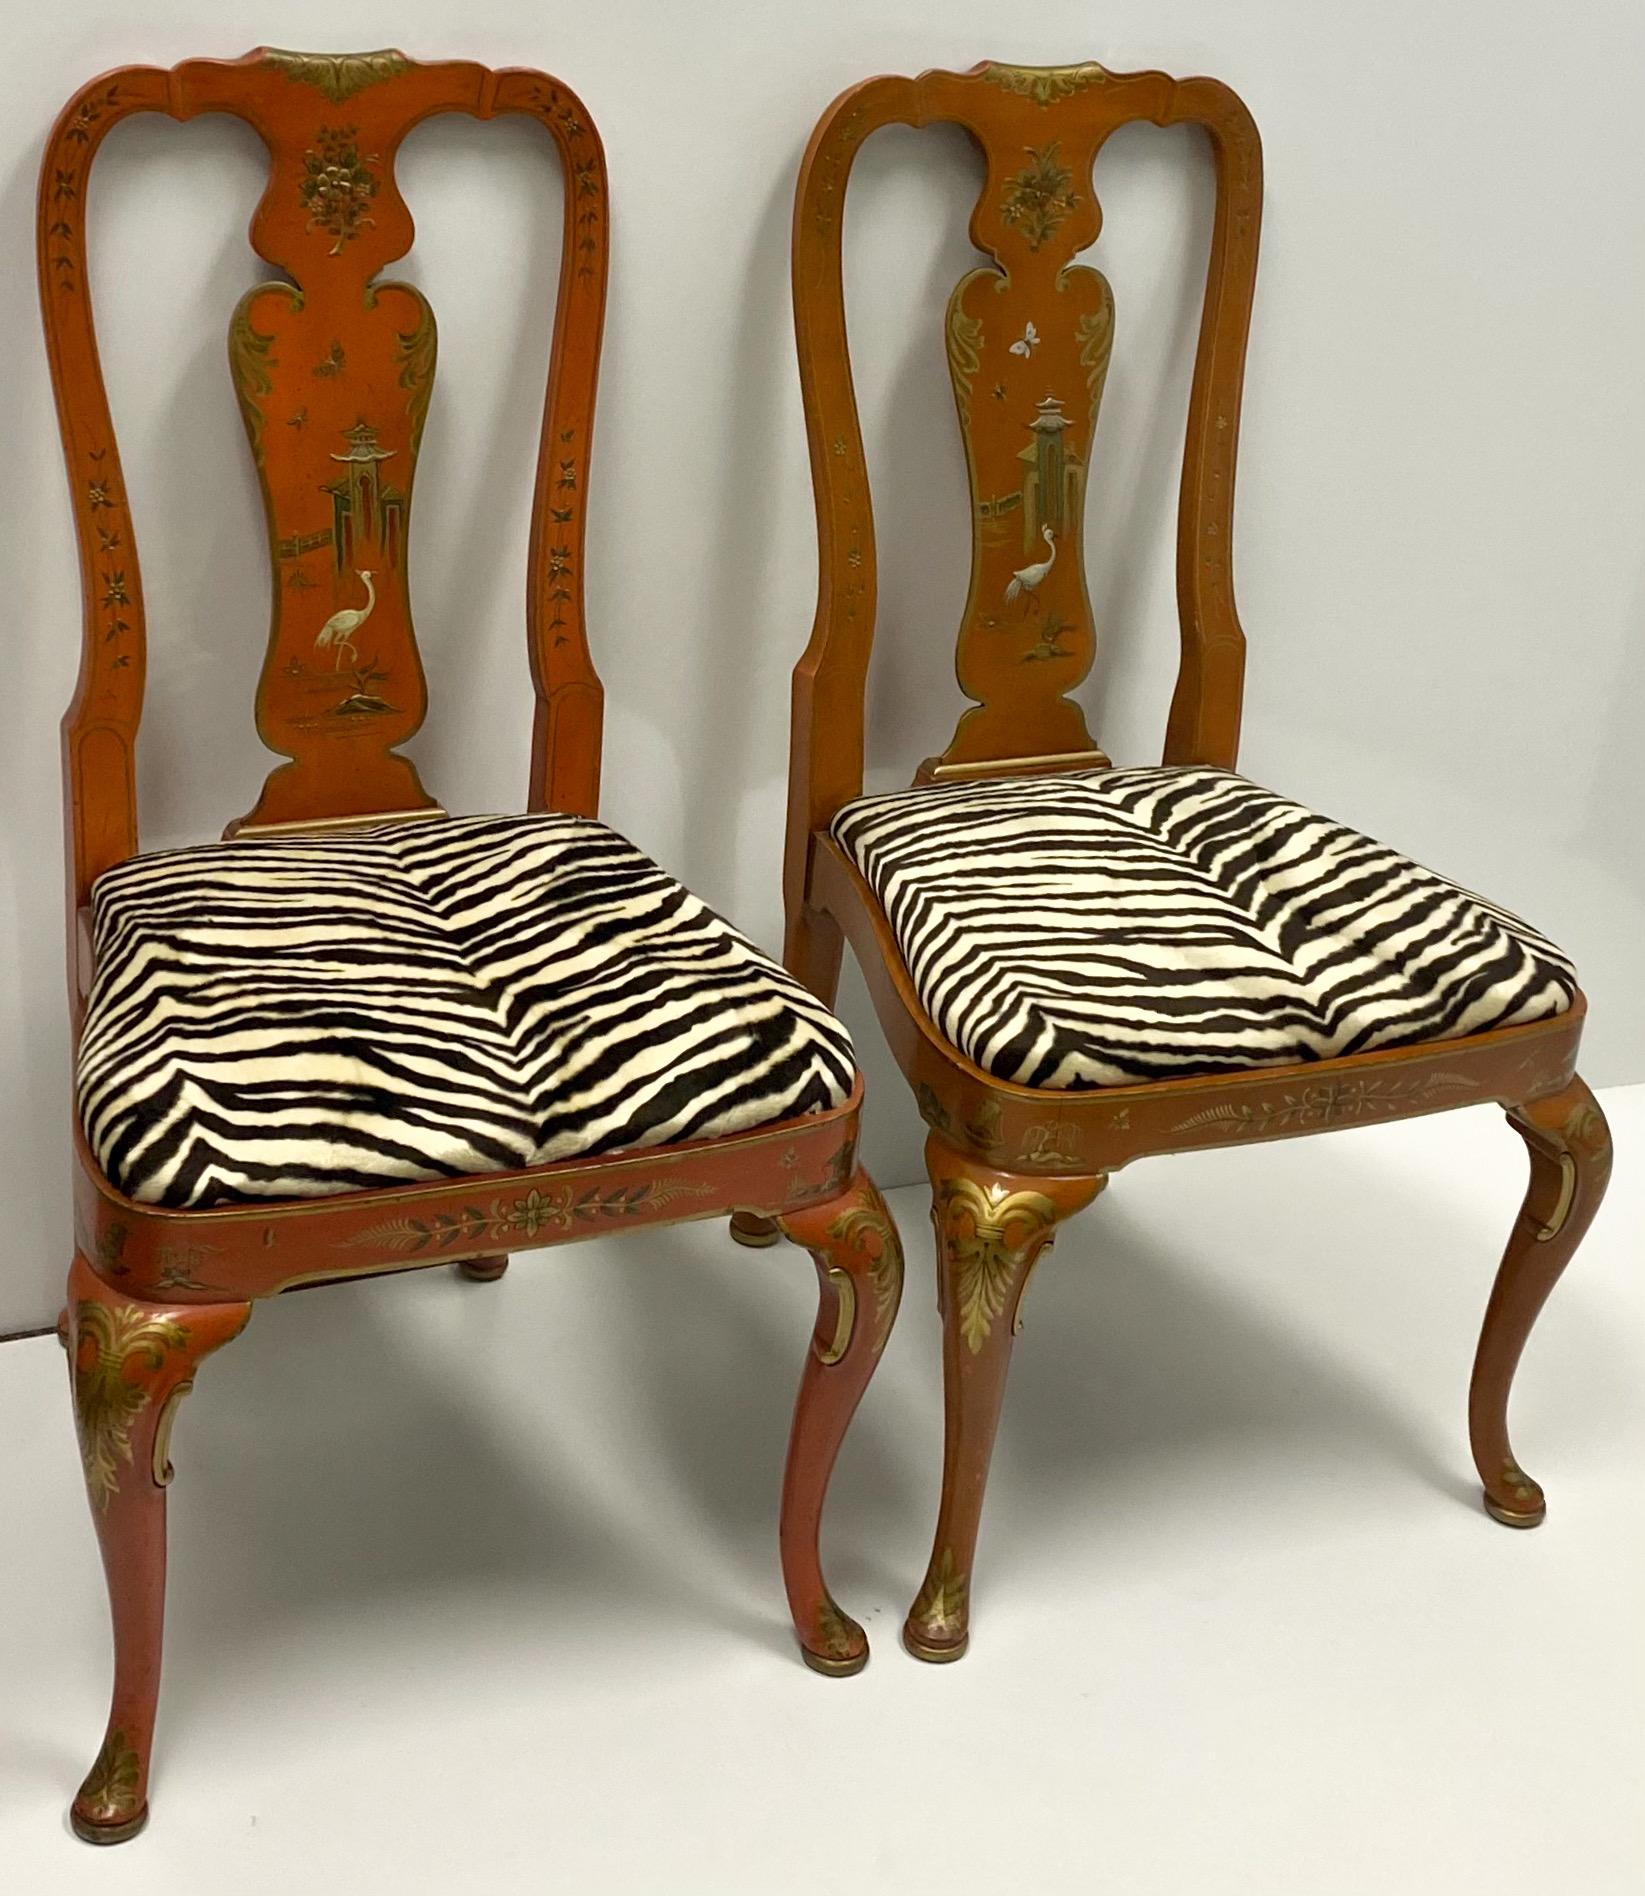 20th Century Orange Chinoiserie Queen Anne Side Chairs by Kindel Furniture, Pair